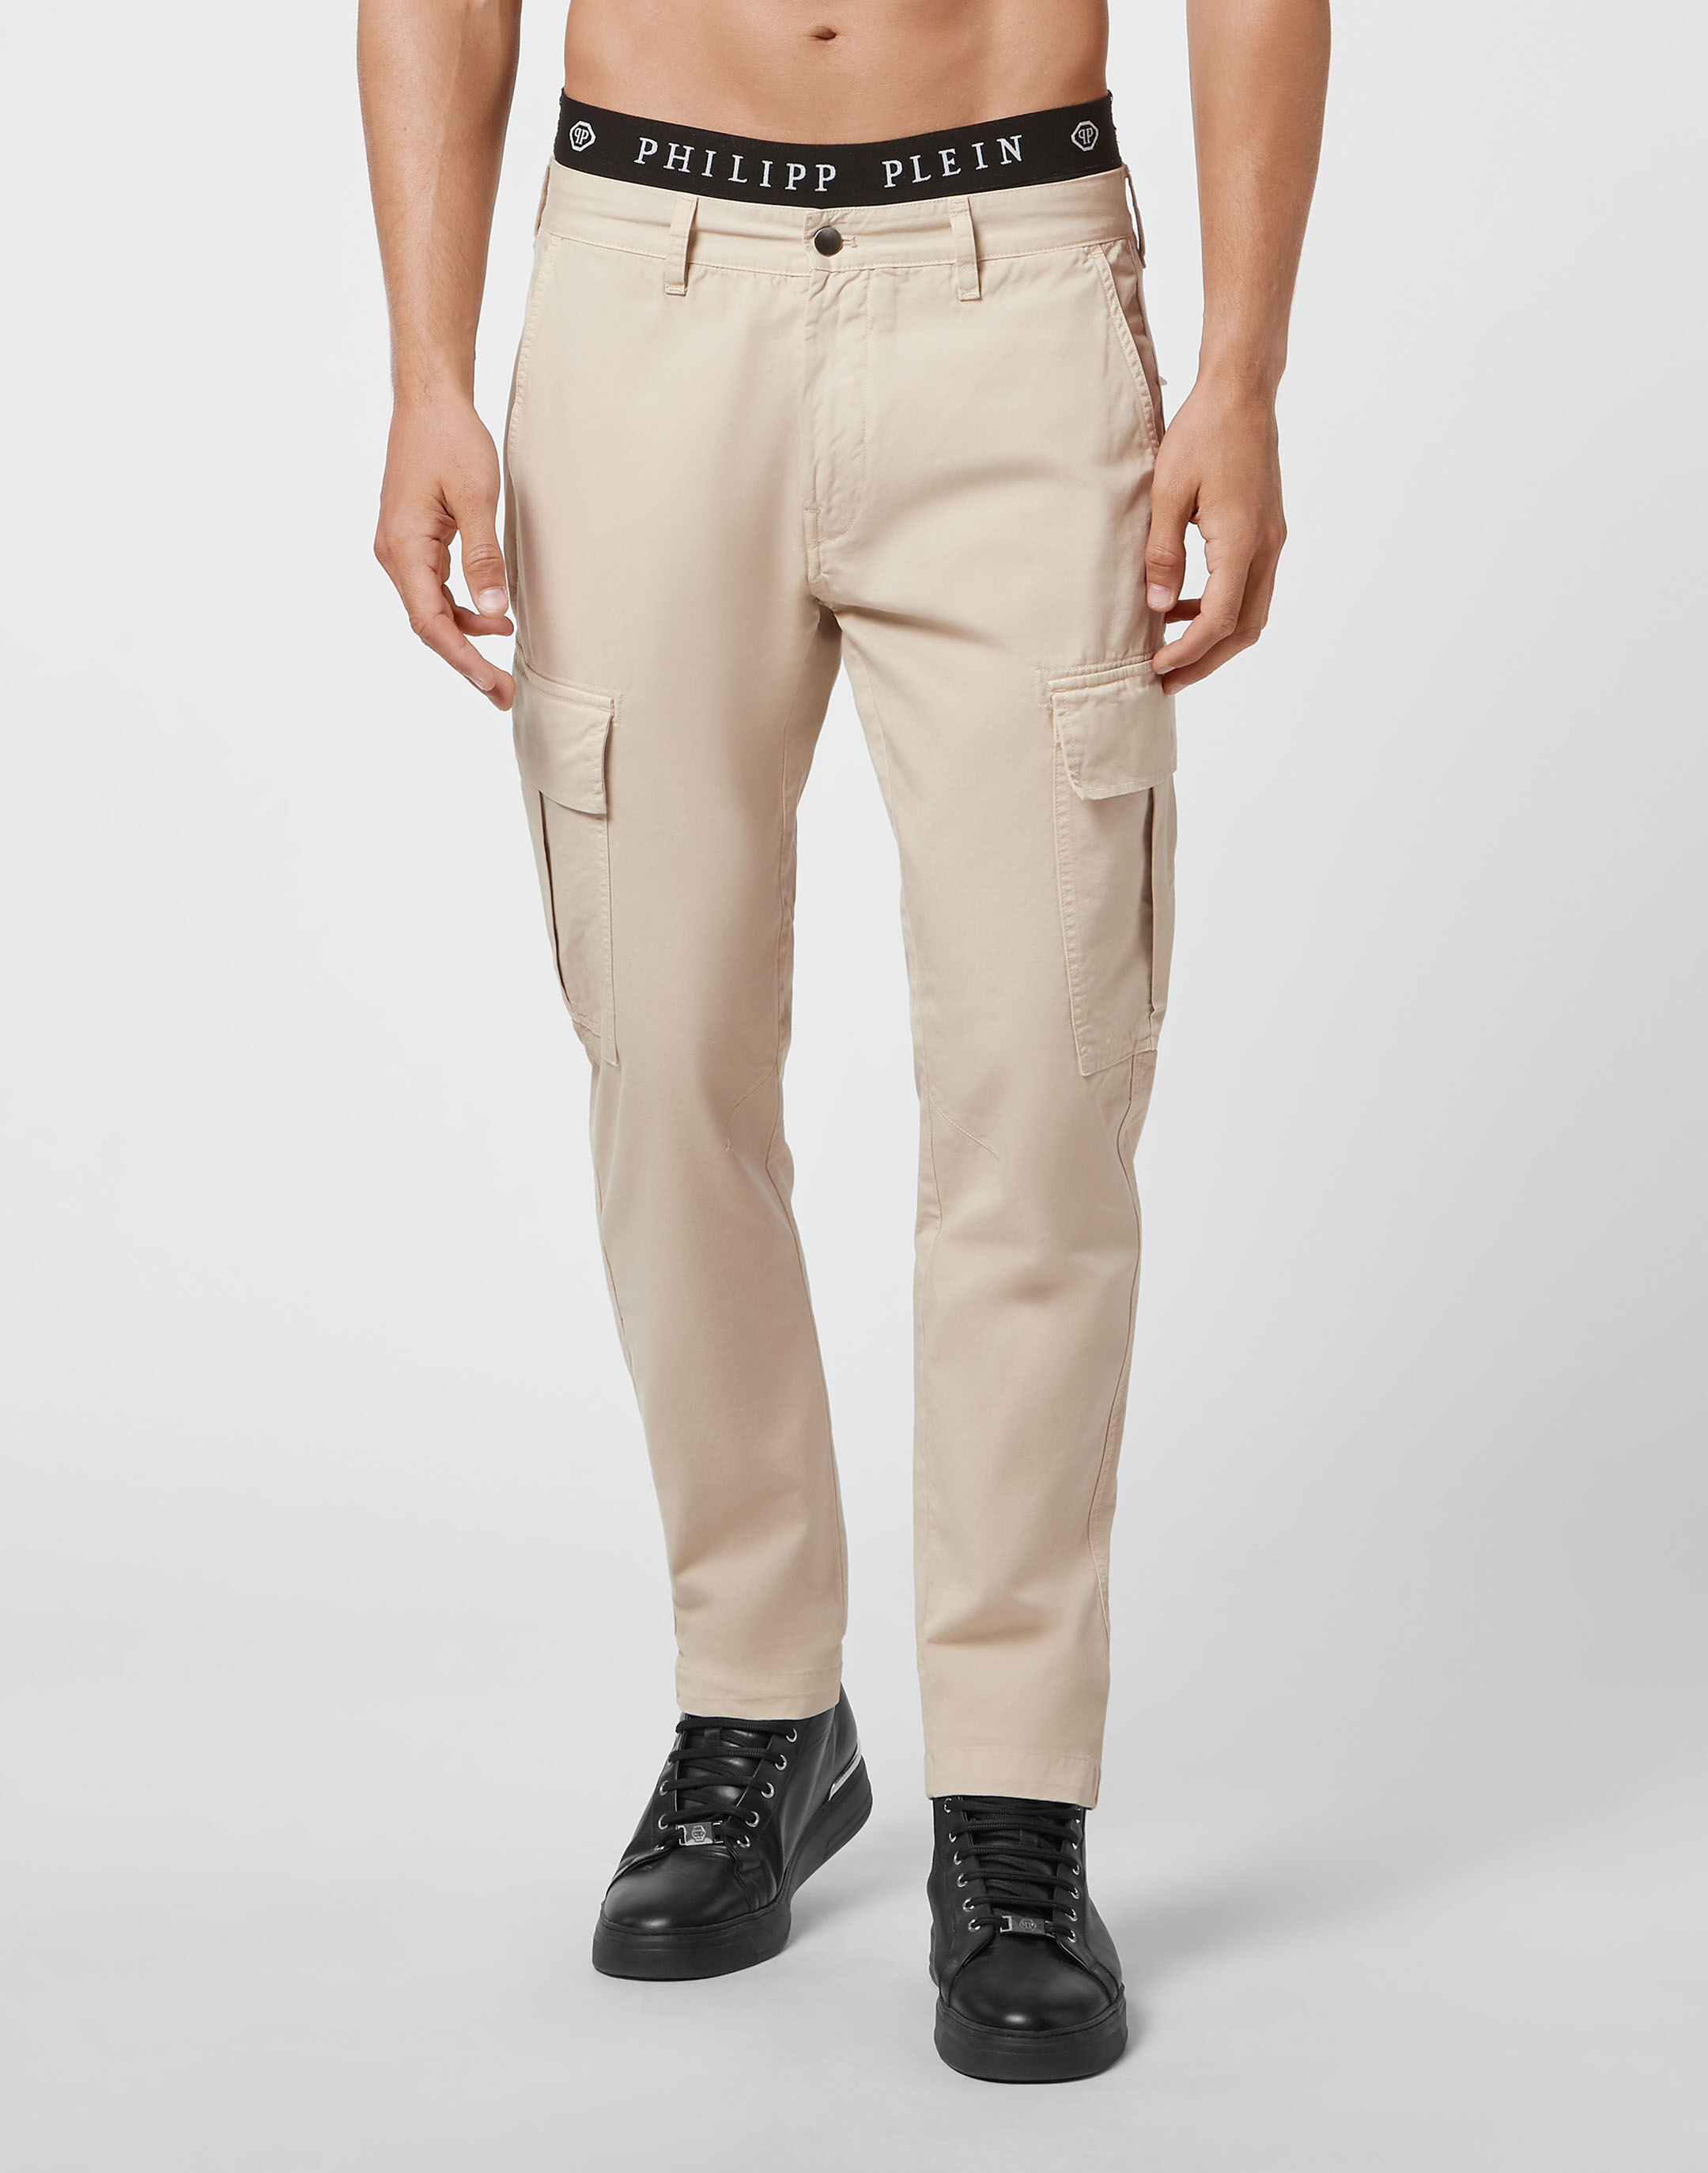 D.FIVE LONG CARGO PANT - DF5-20033 - Trousers and Shorts - Defcon 5 Italy